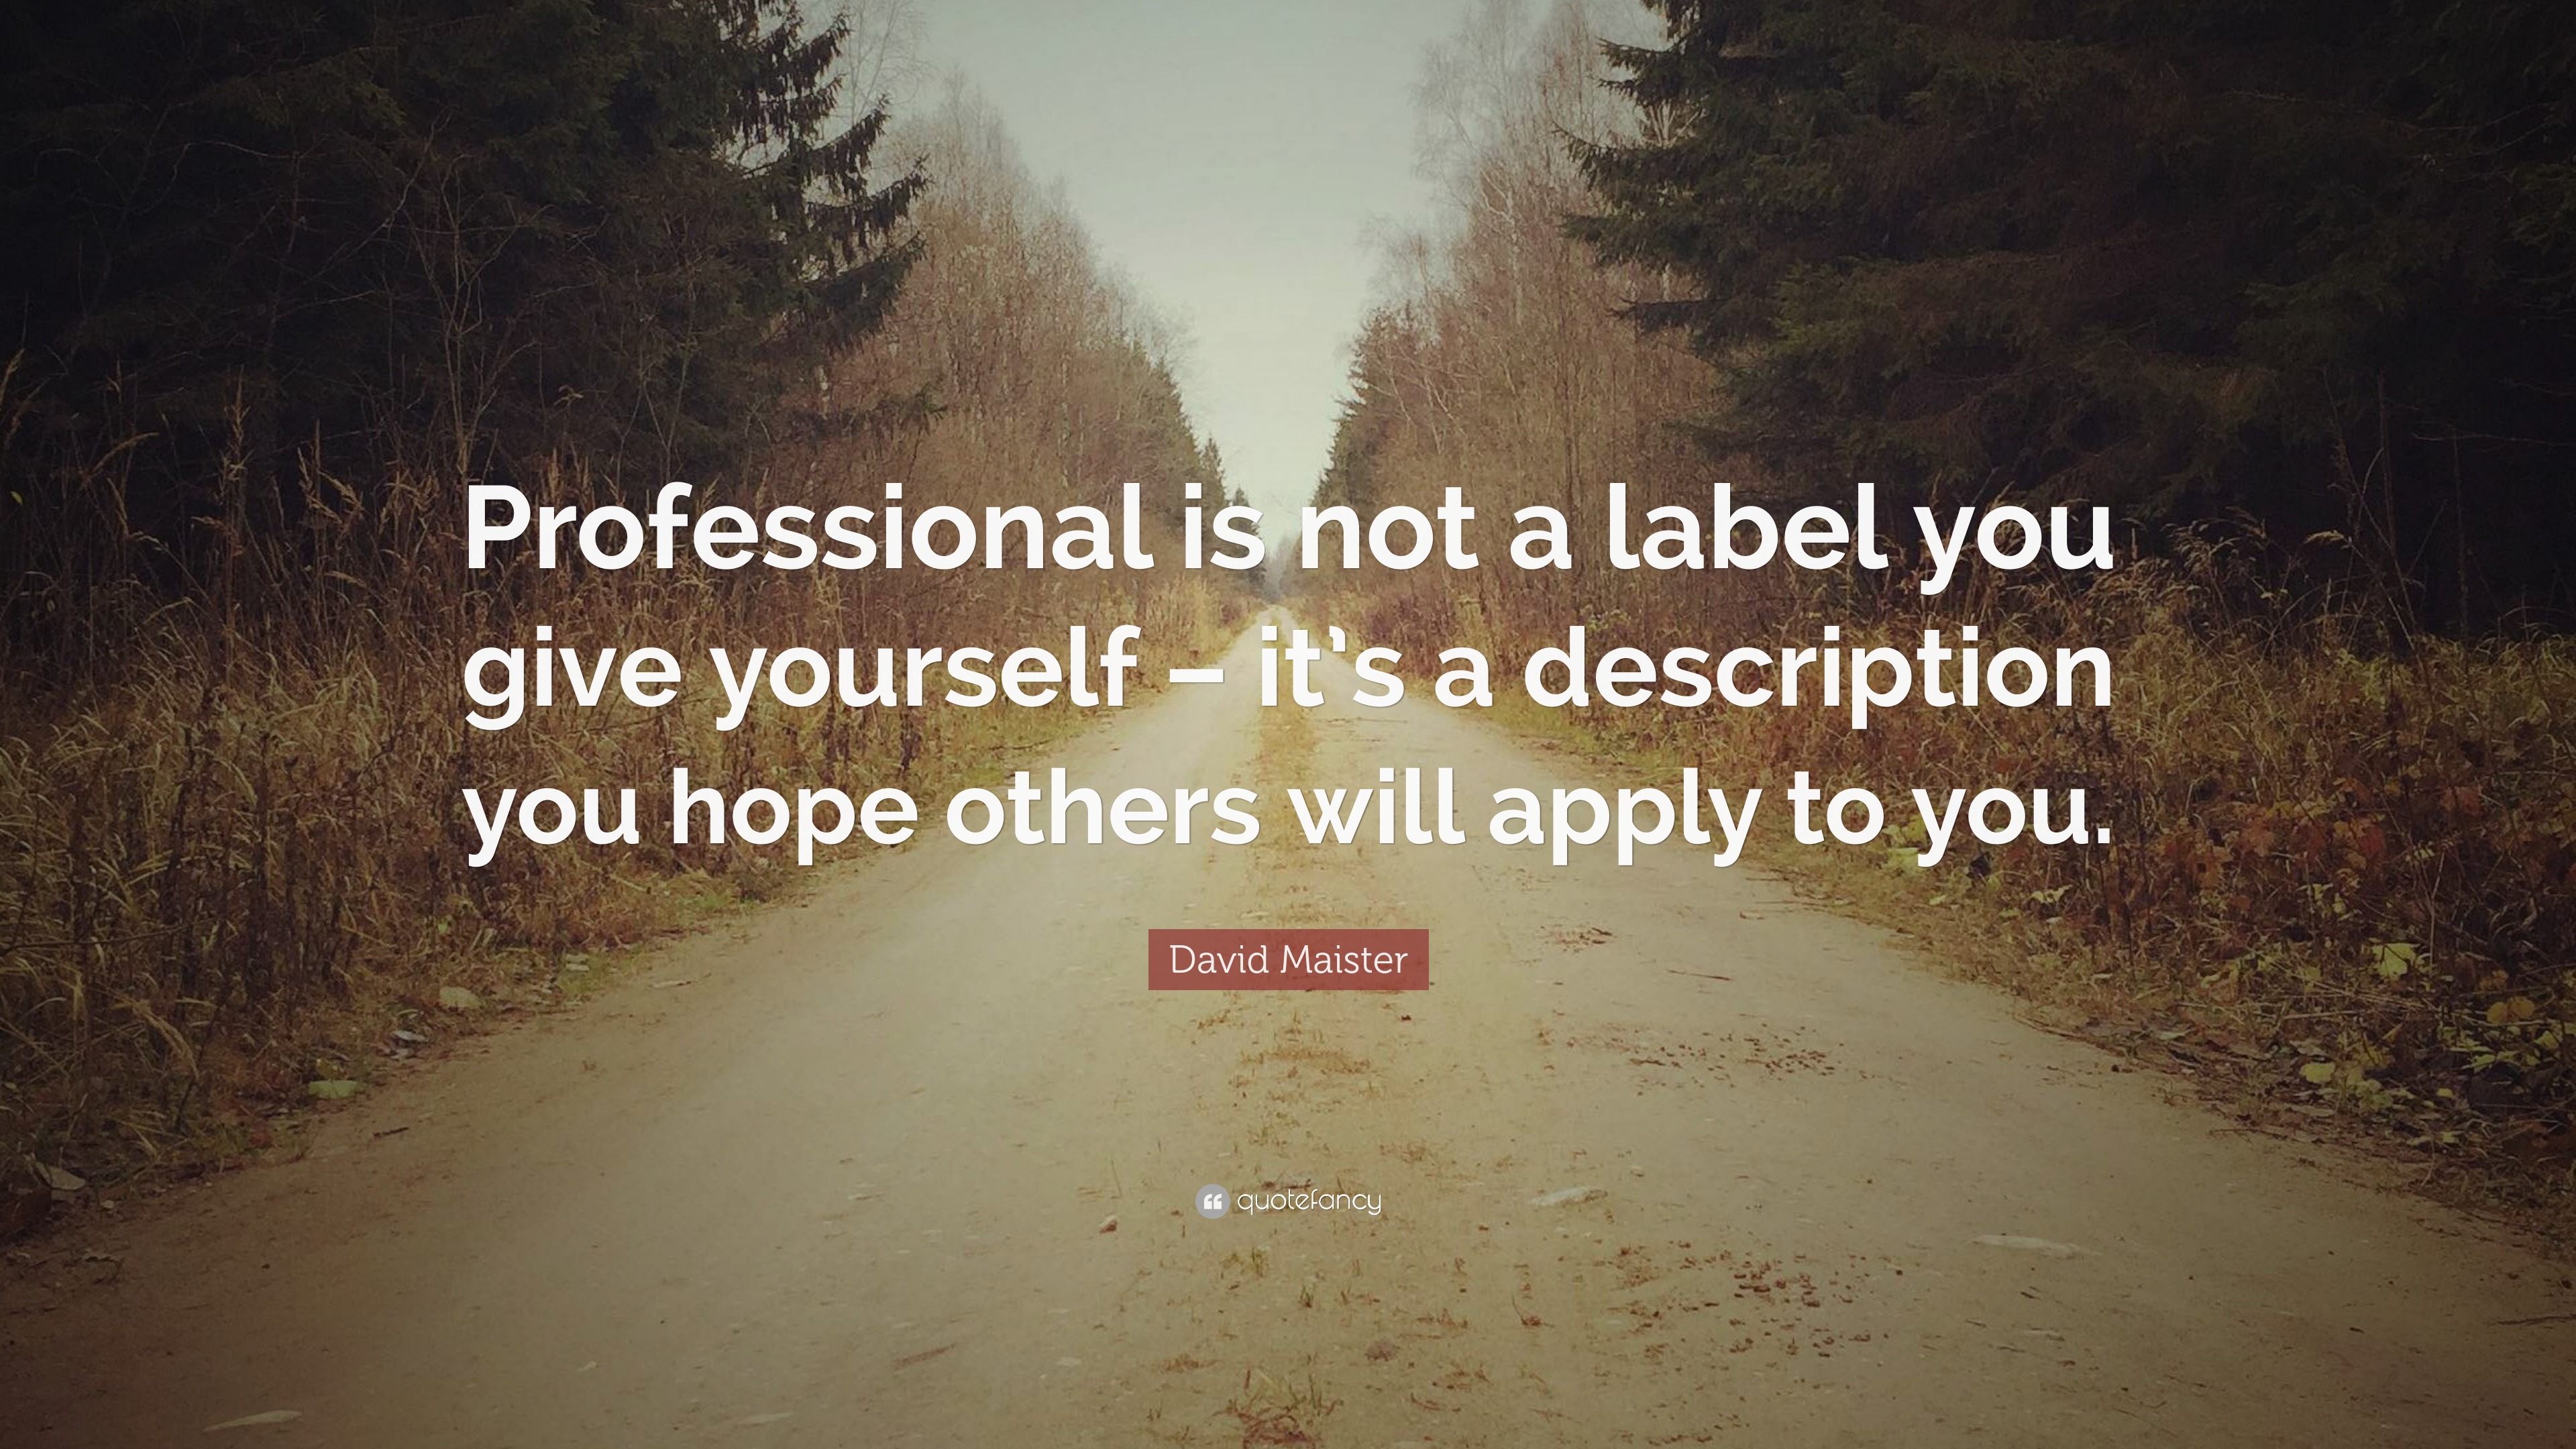 David Maister Quote “Professional is not a label you give